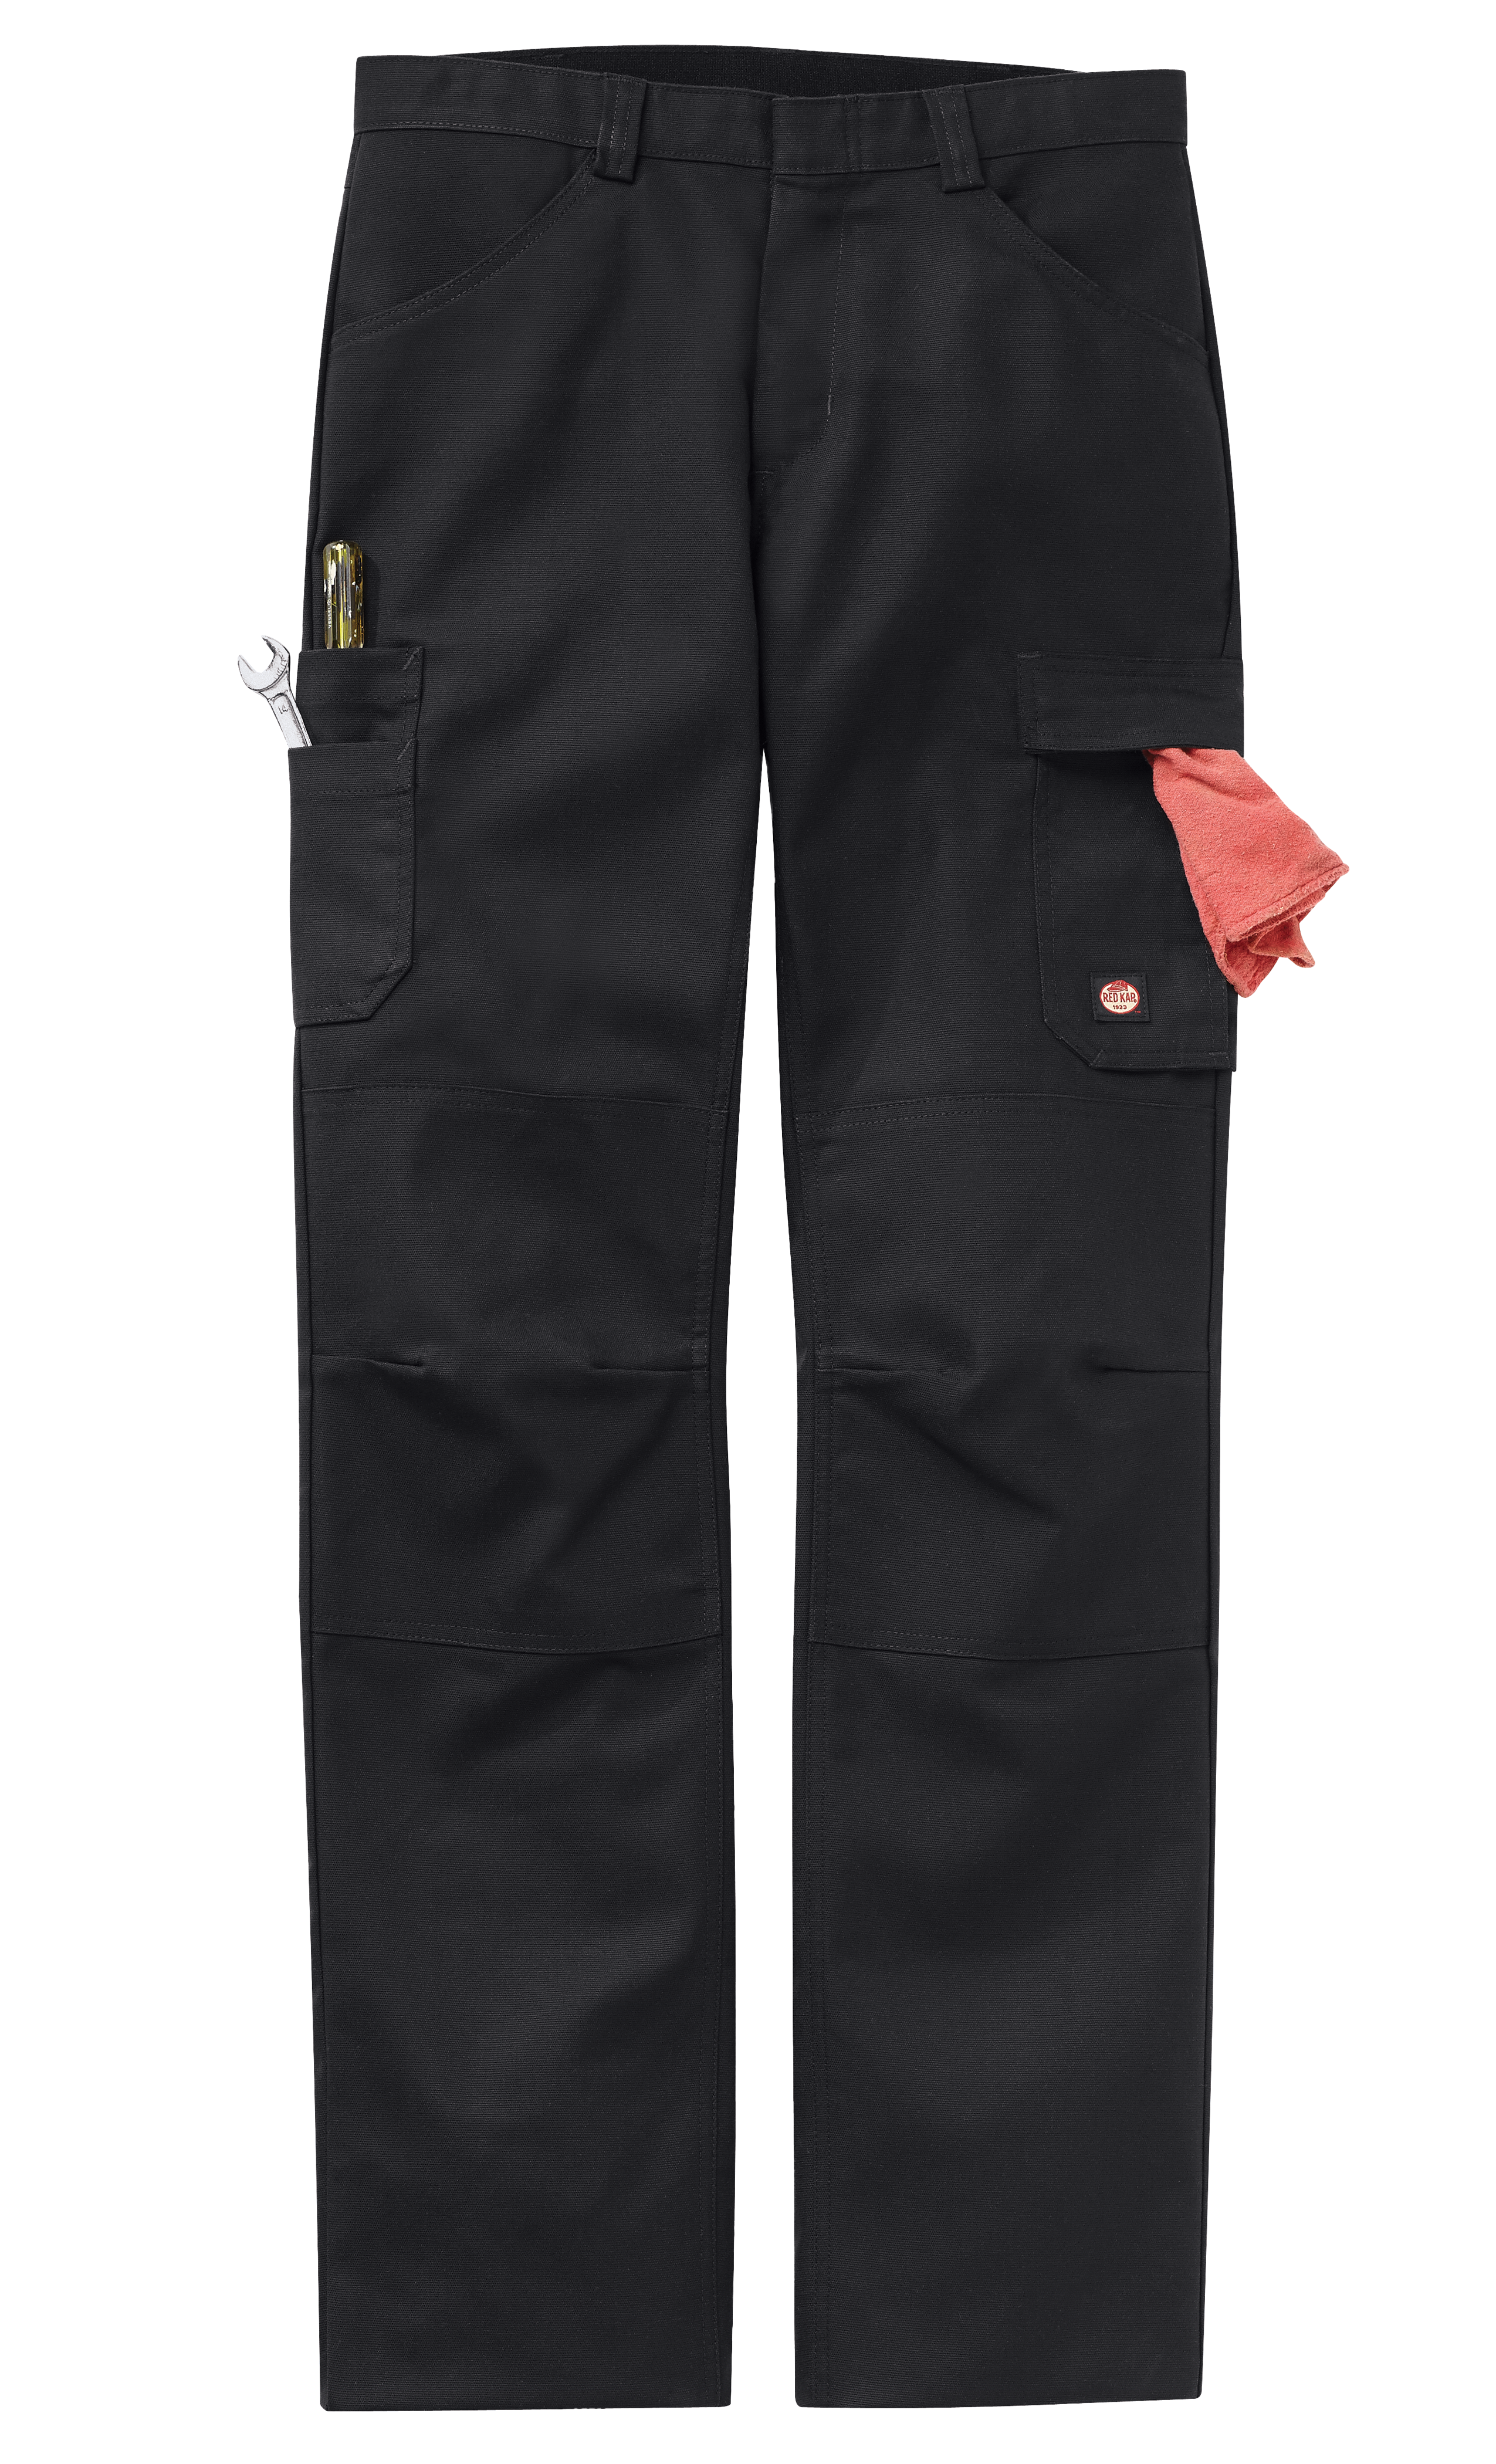 Automotive Uniform Pant With Red Shop Towel Hanging From A Cargo Pocket